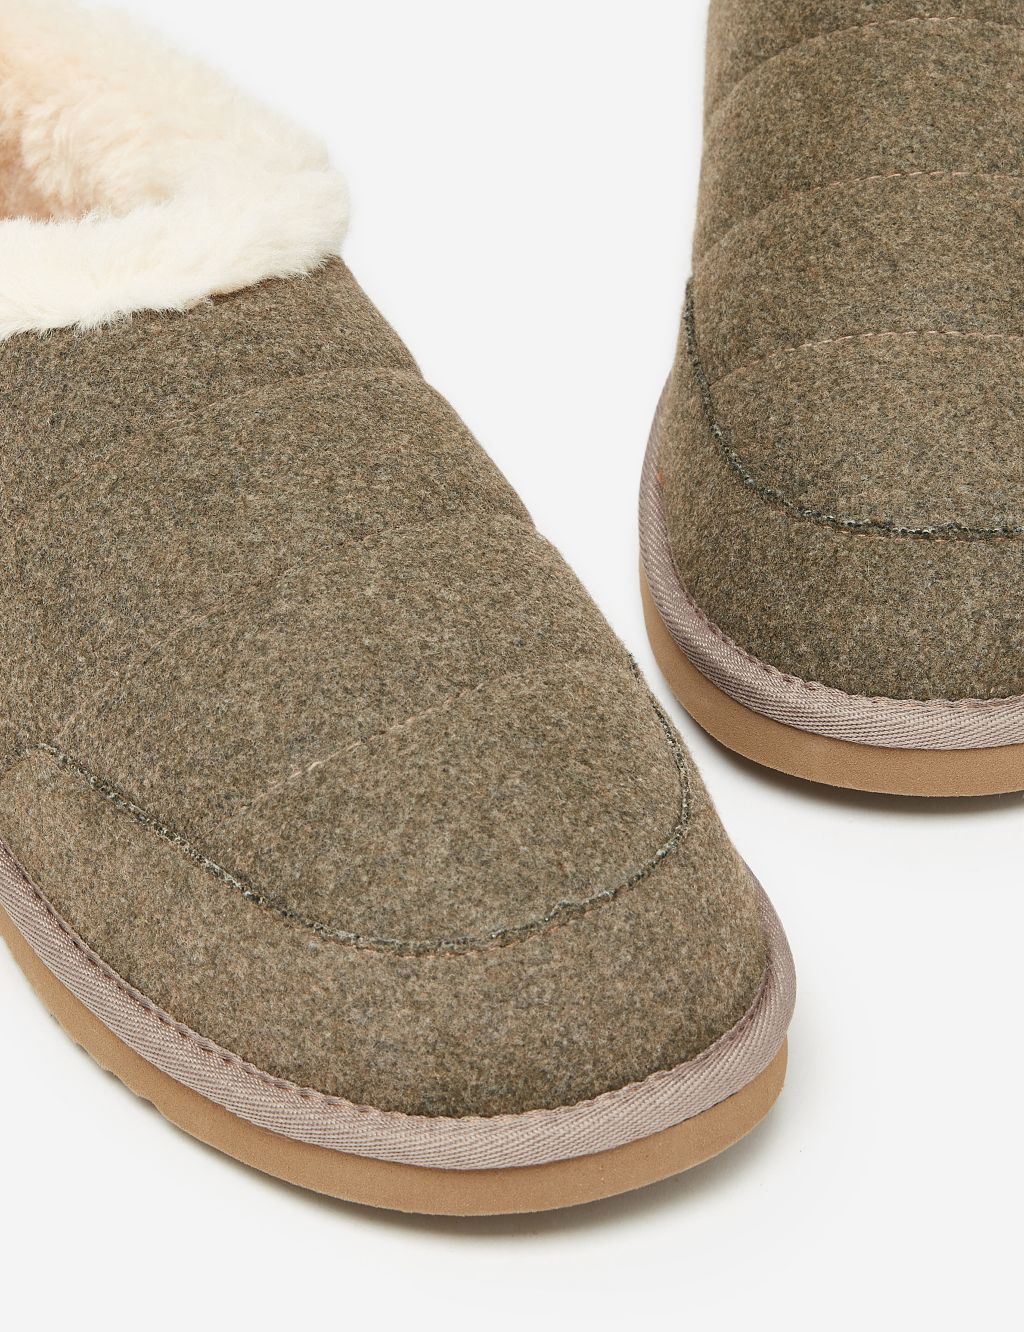 Faux Fur Lined Mule Slippers image 6